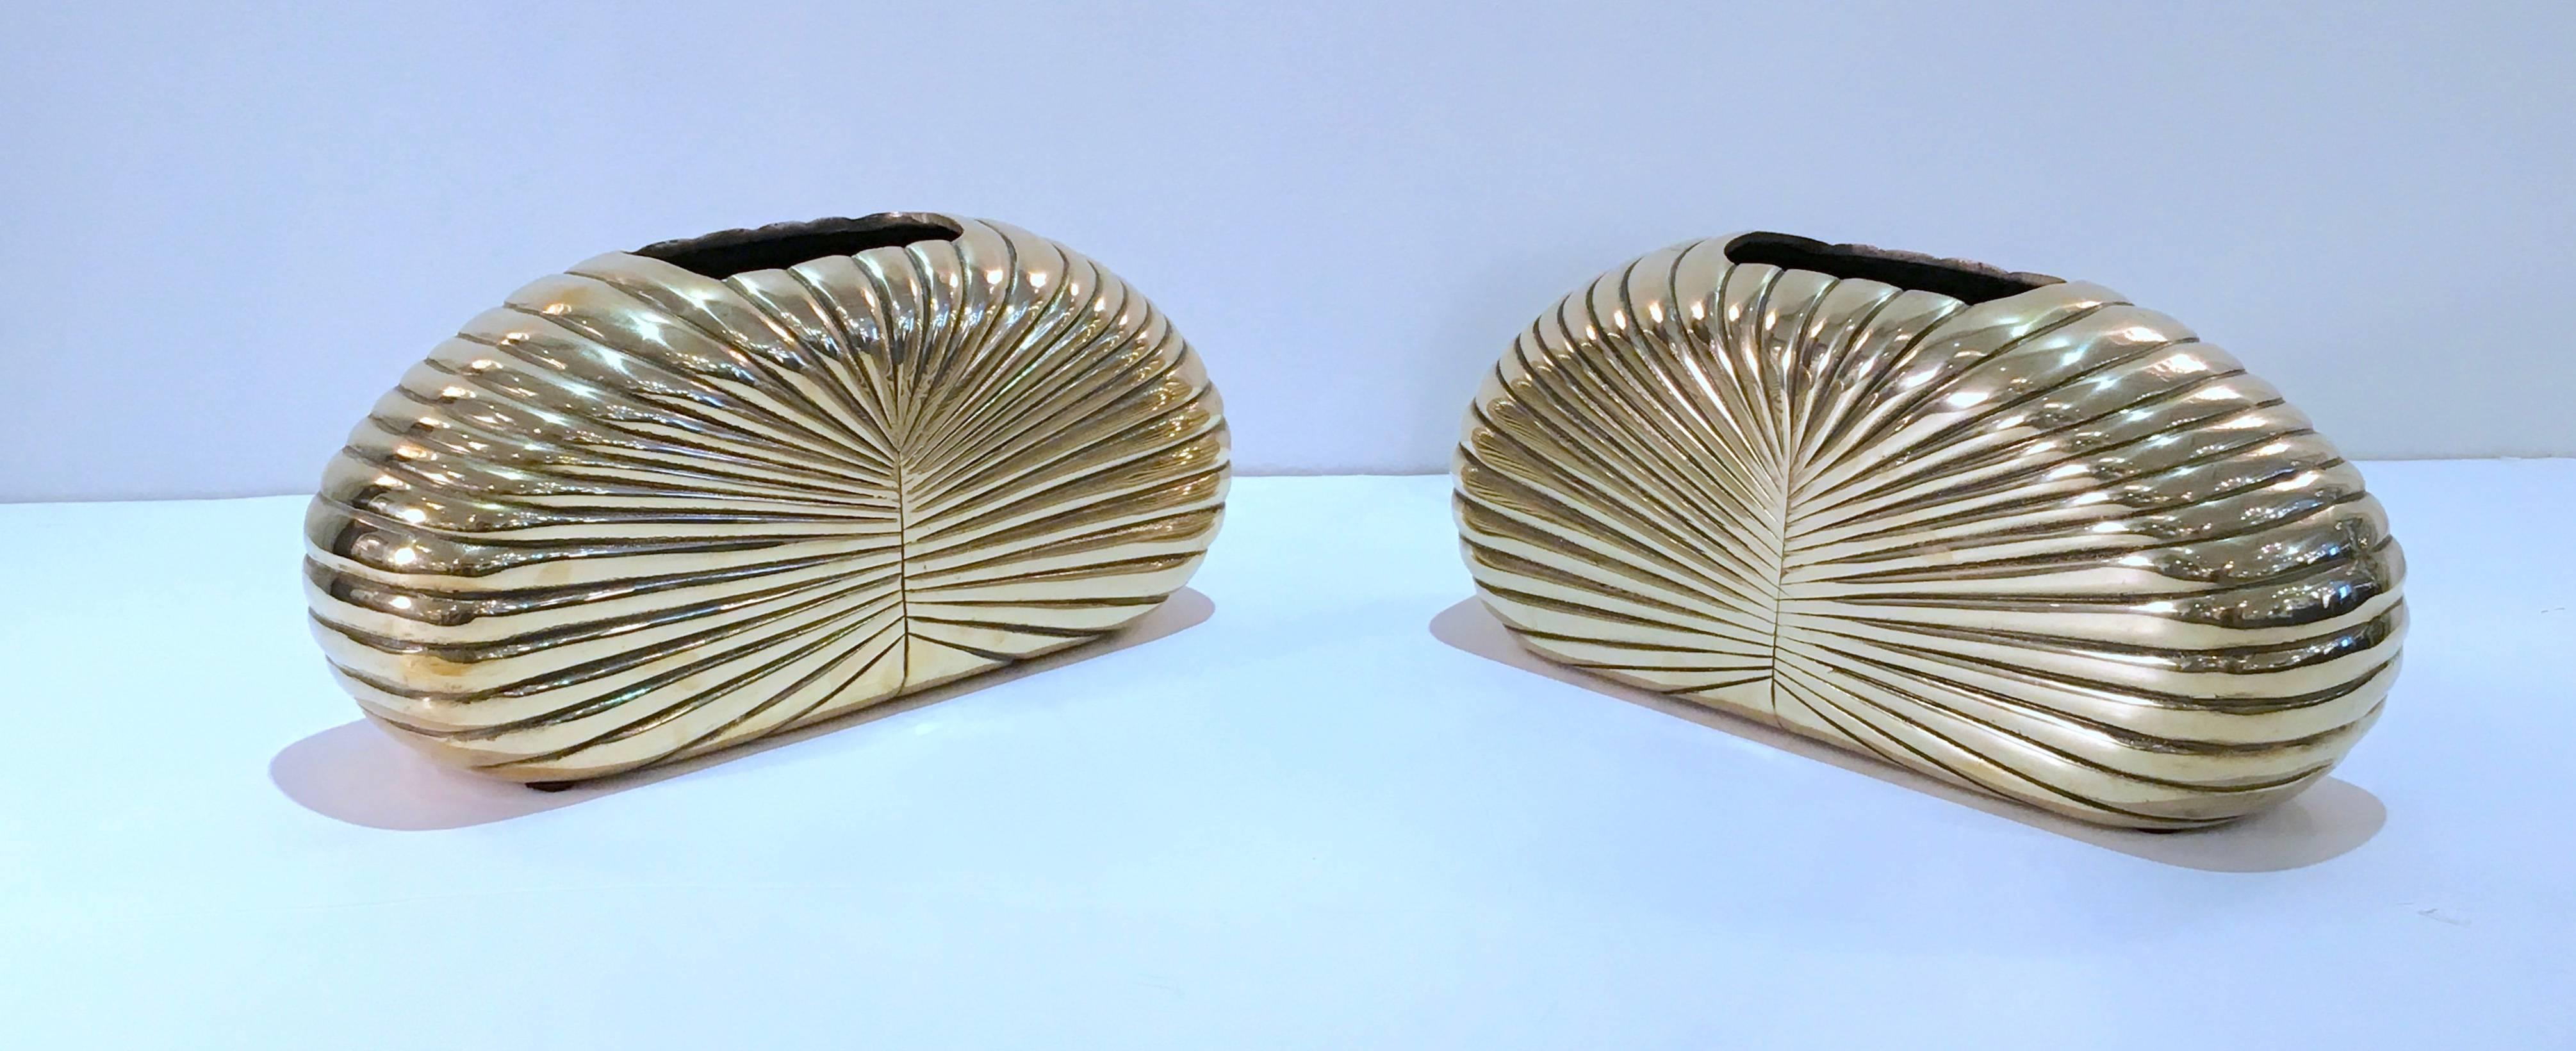 A very stylish pair of sculpted vases in a gleaming polished solid brass. These are rare and are the largest size in this design series by Dolbi Cashier. Very chic! Please contact for location. 